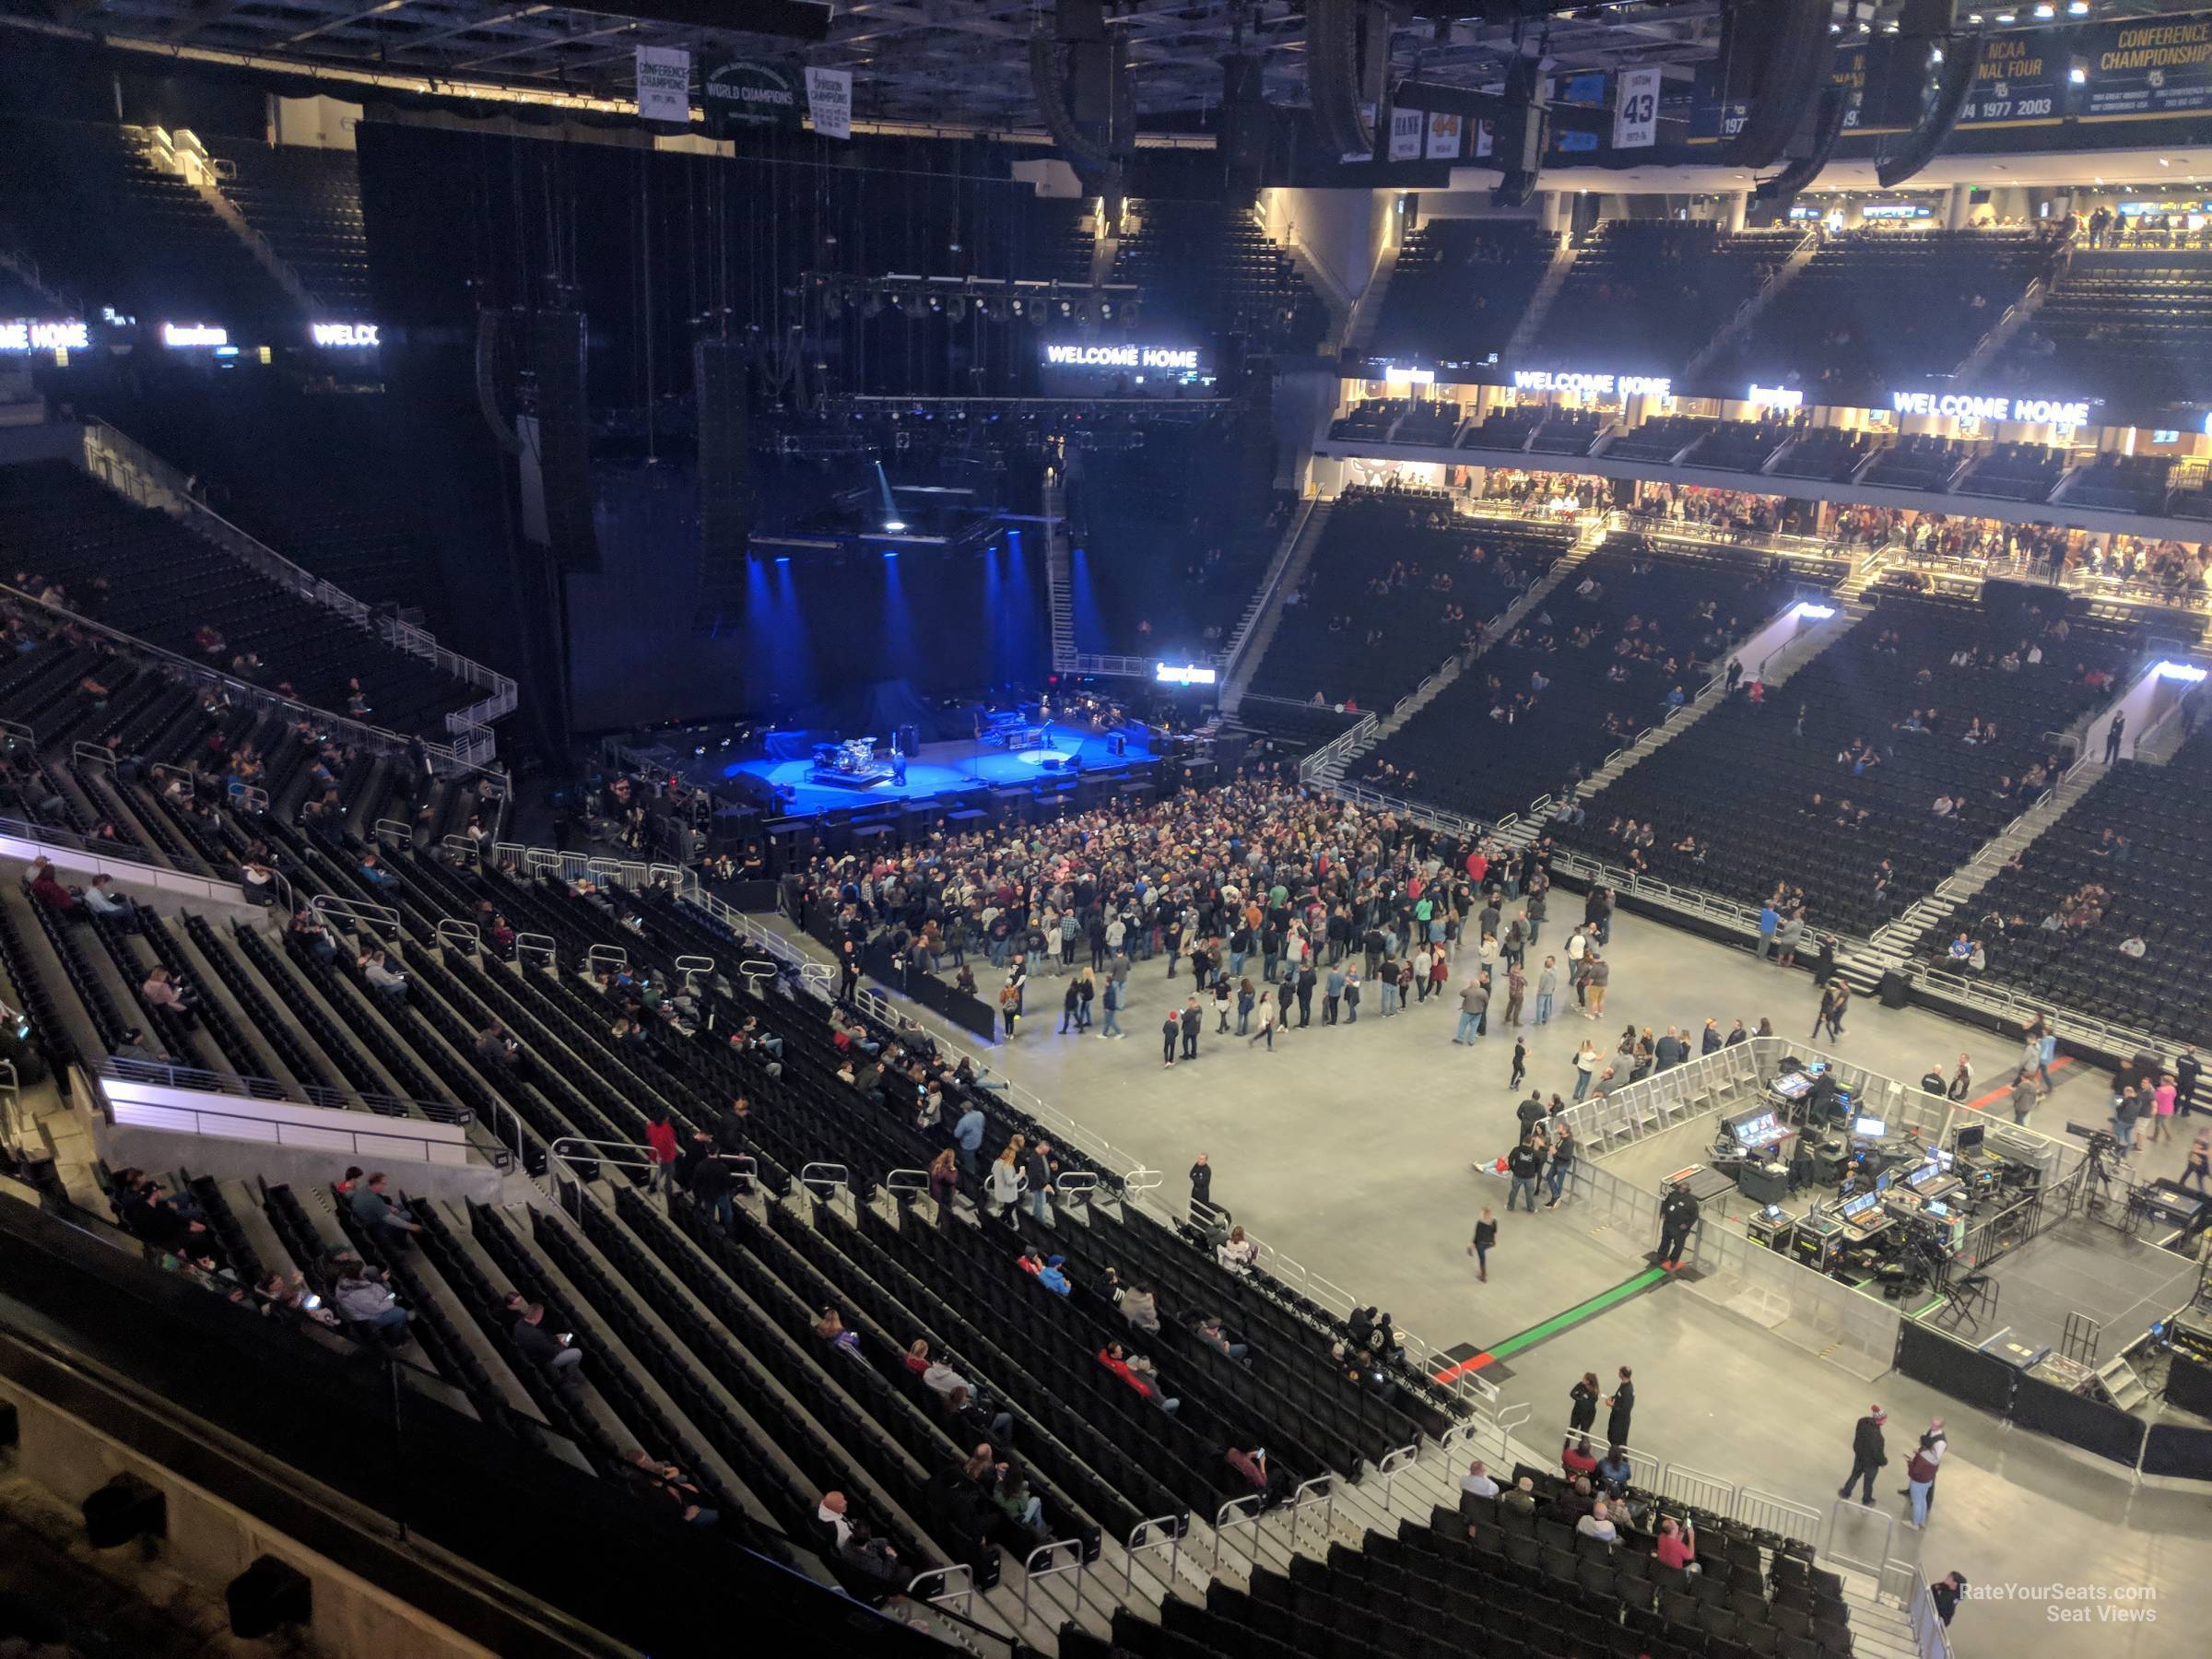 section 205, row 3 seat view  for concert - fiserv forum